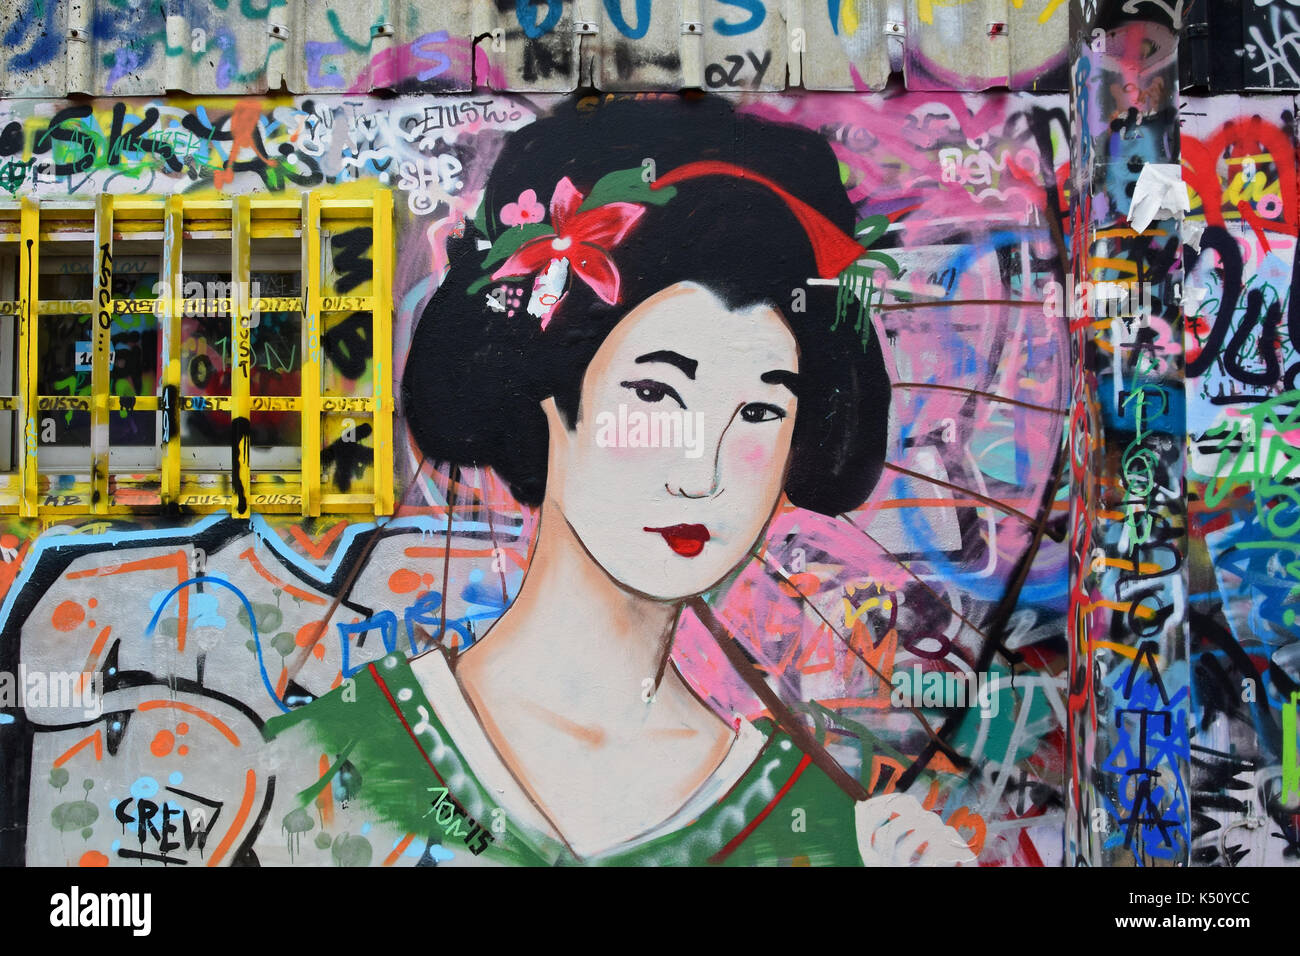 Alamy - hi-res photography Japanese graffiti images stock and